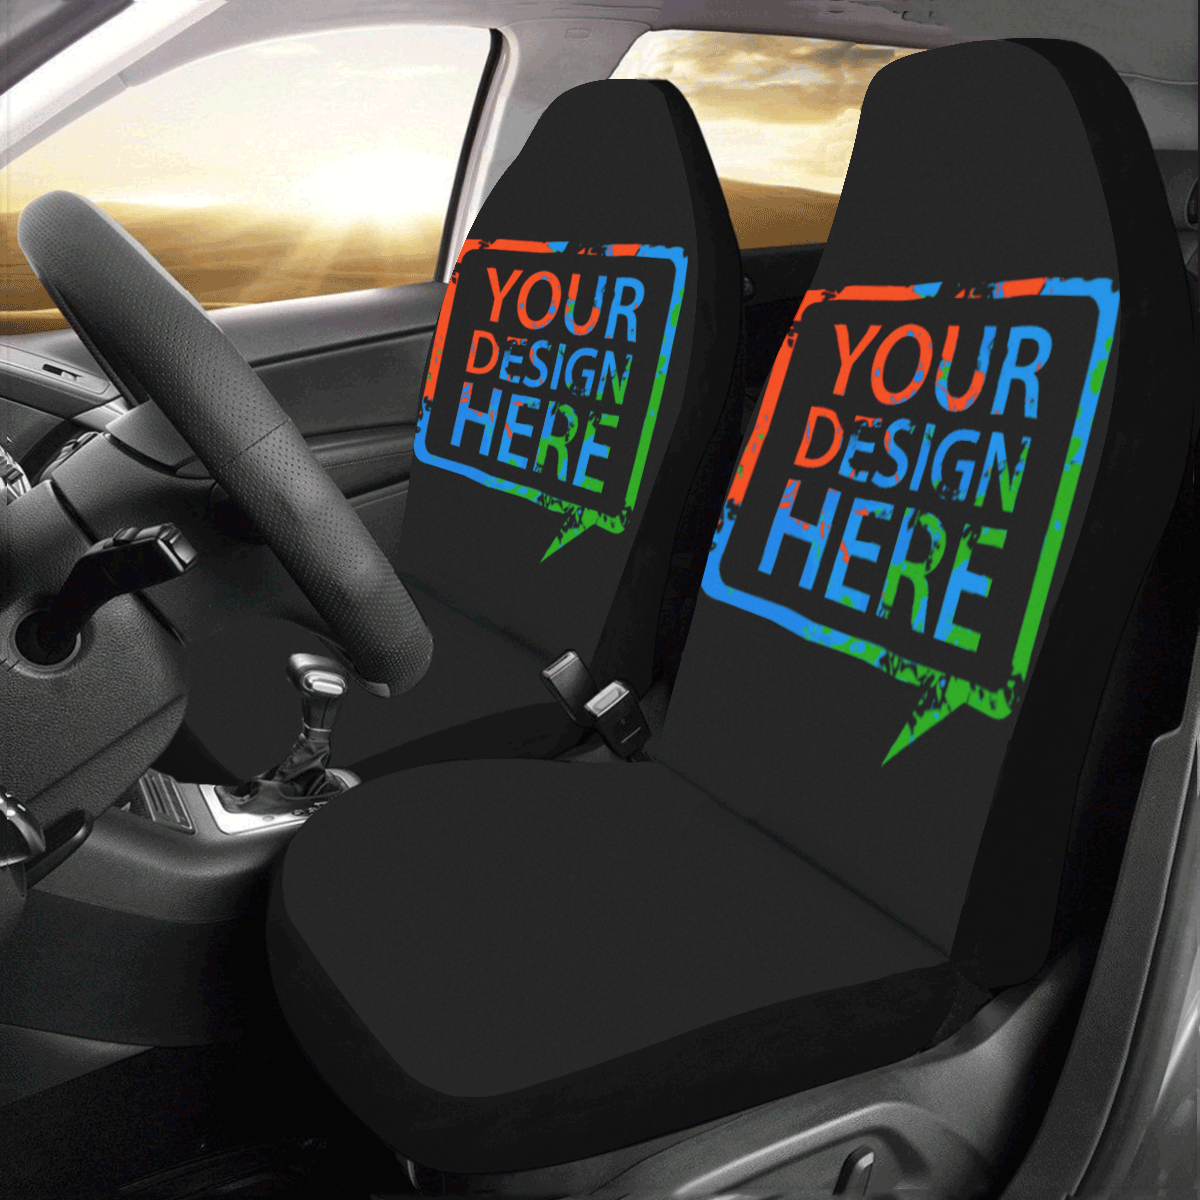 Custom/Personalized Car Seat Covers (Set of 2)